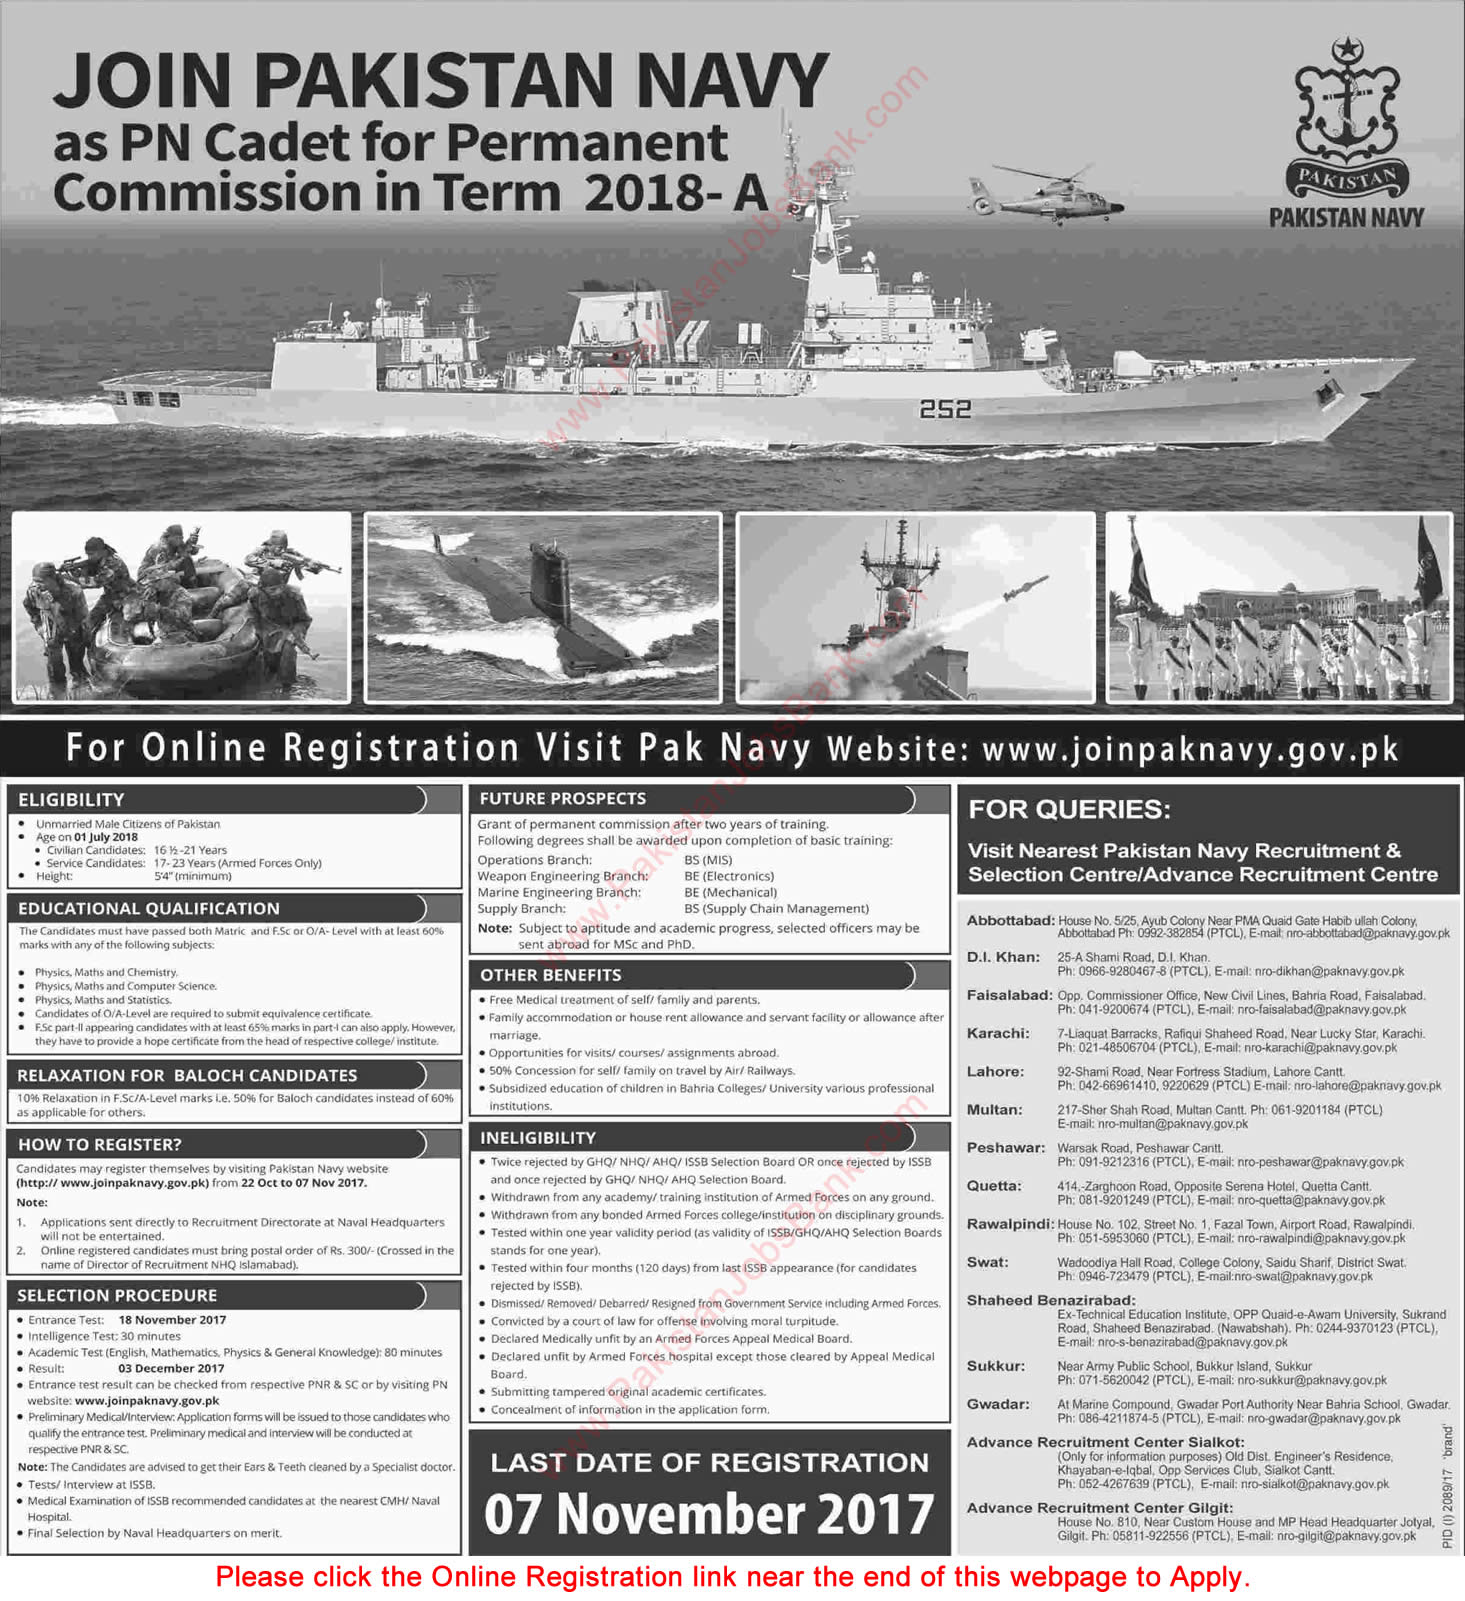 Join Pakistan Navy as PN Cadet October 2017 Online Registration for Permanent Commission in Term 2018-A Latest